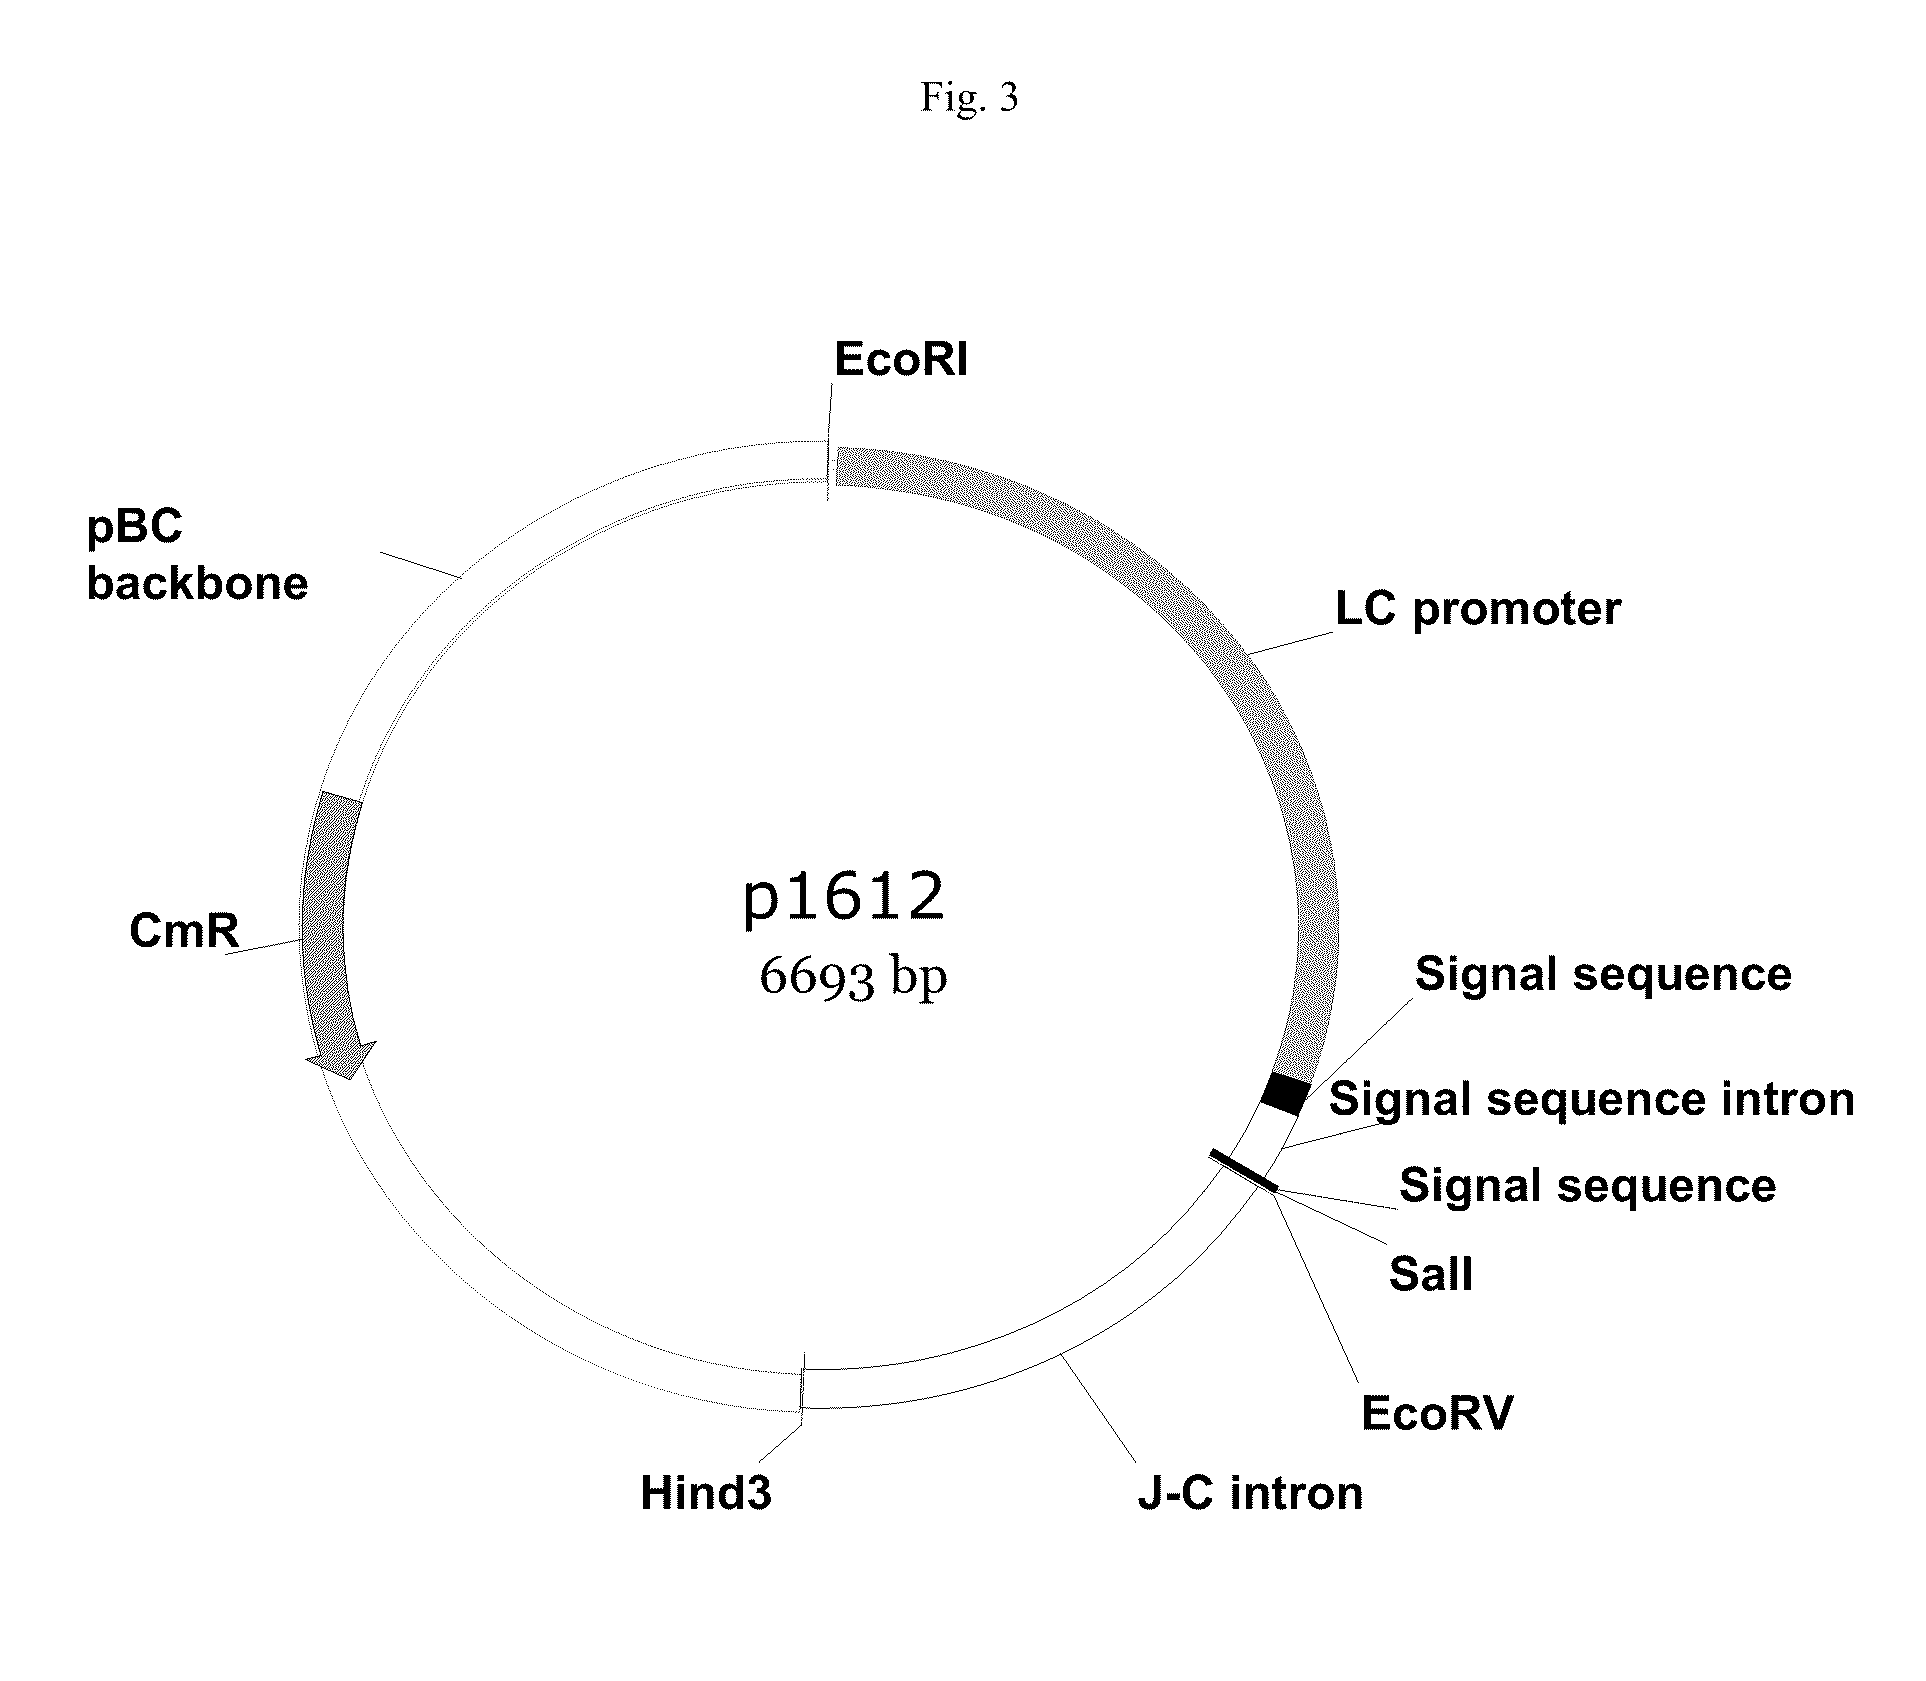 Vectors, host cells, and methods of production and uses